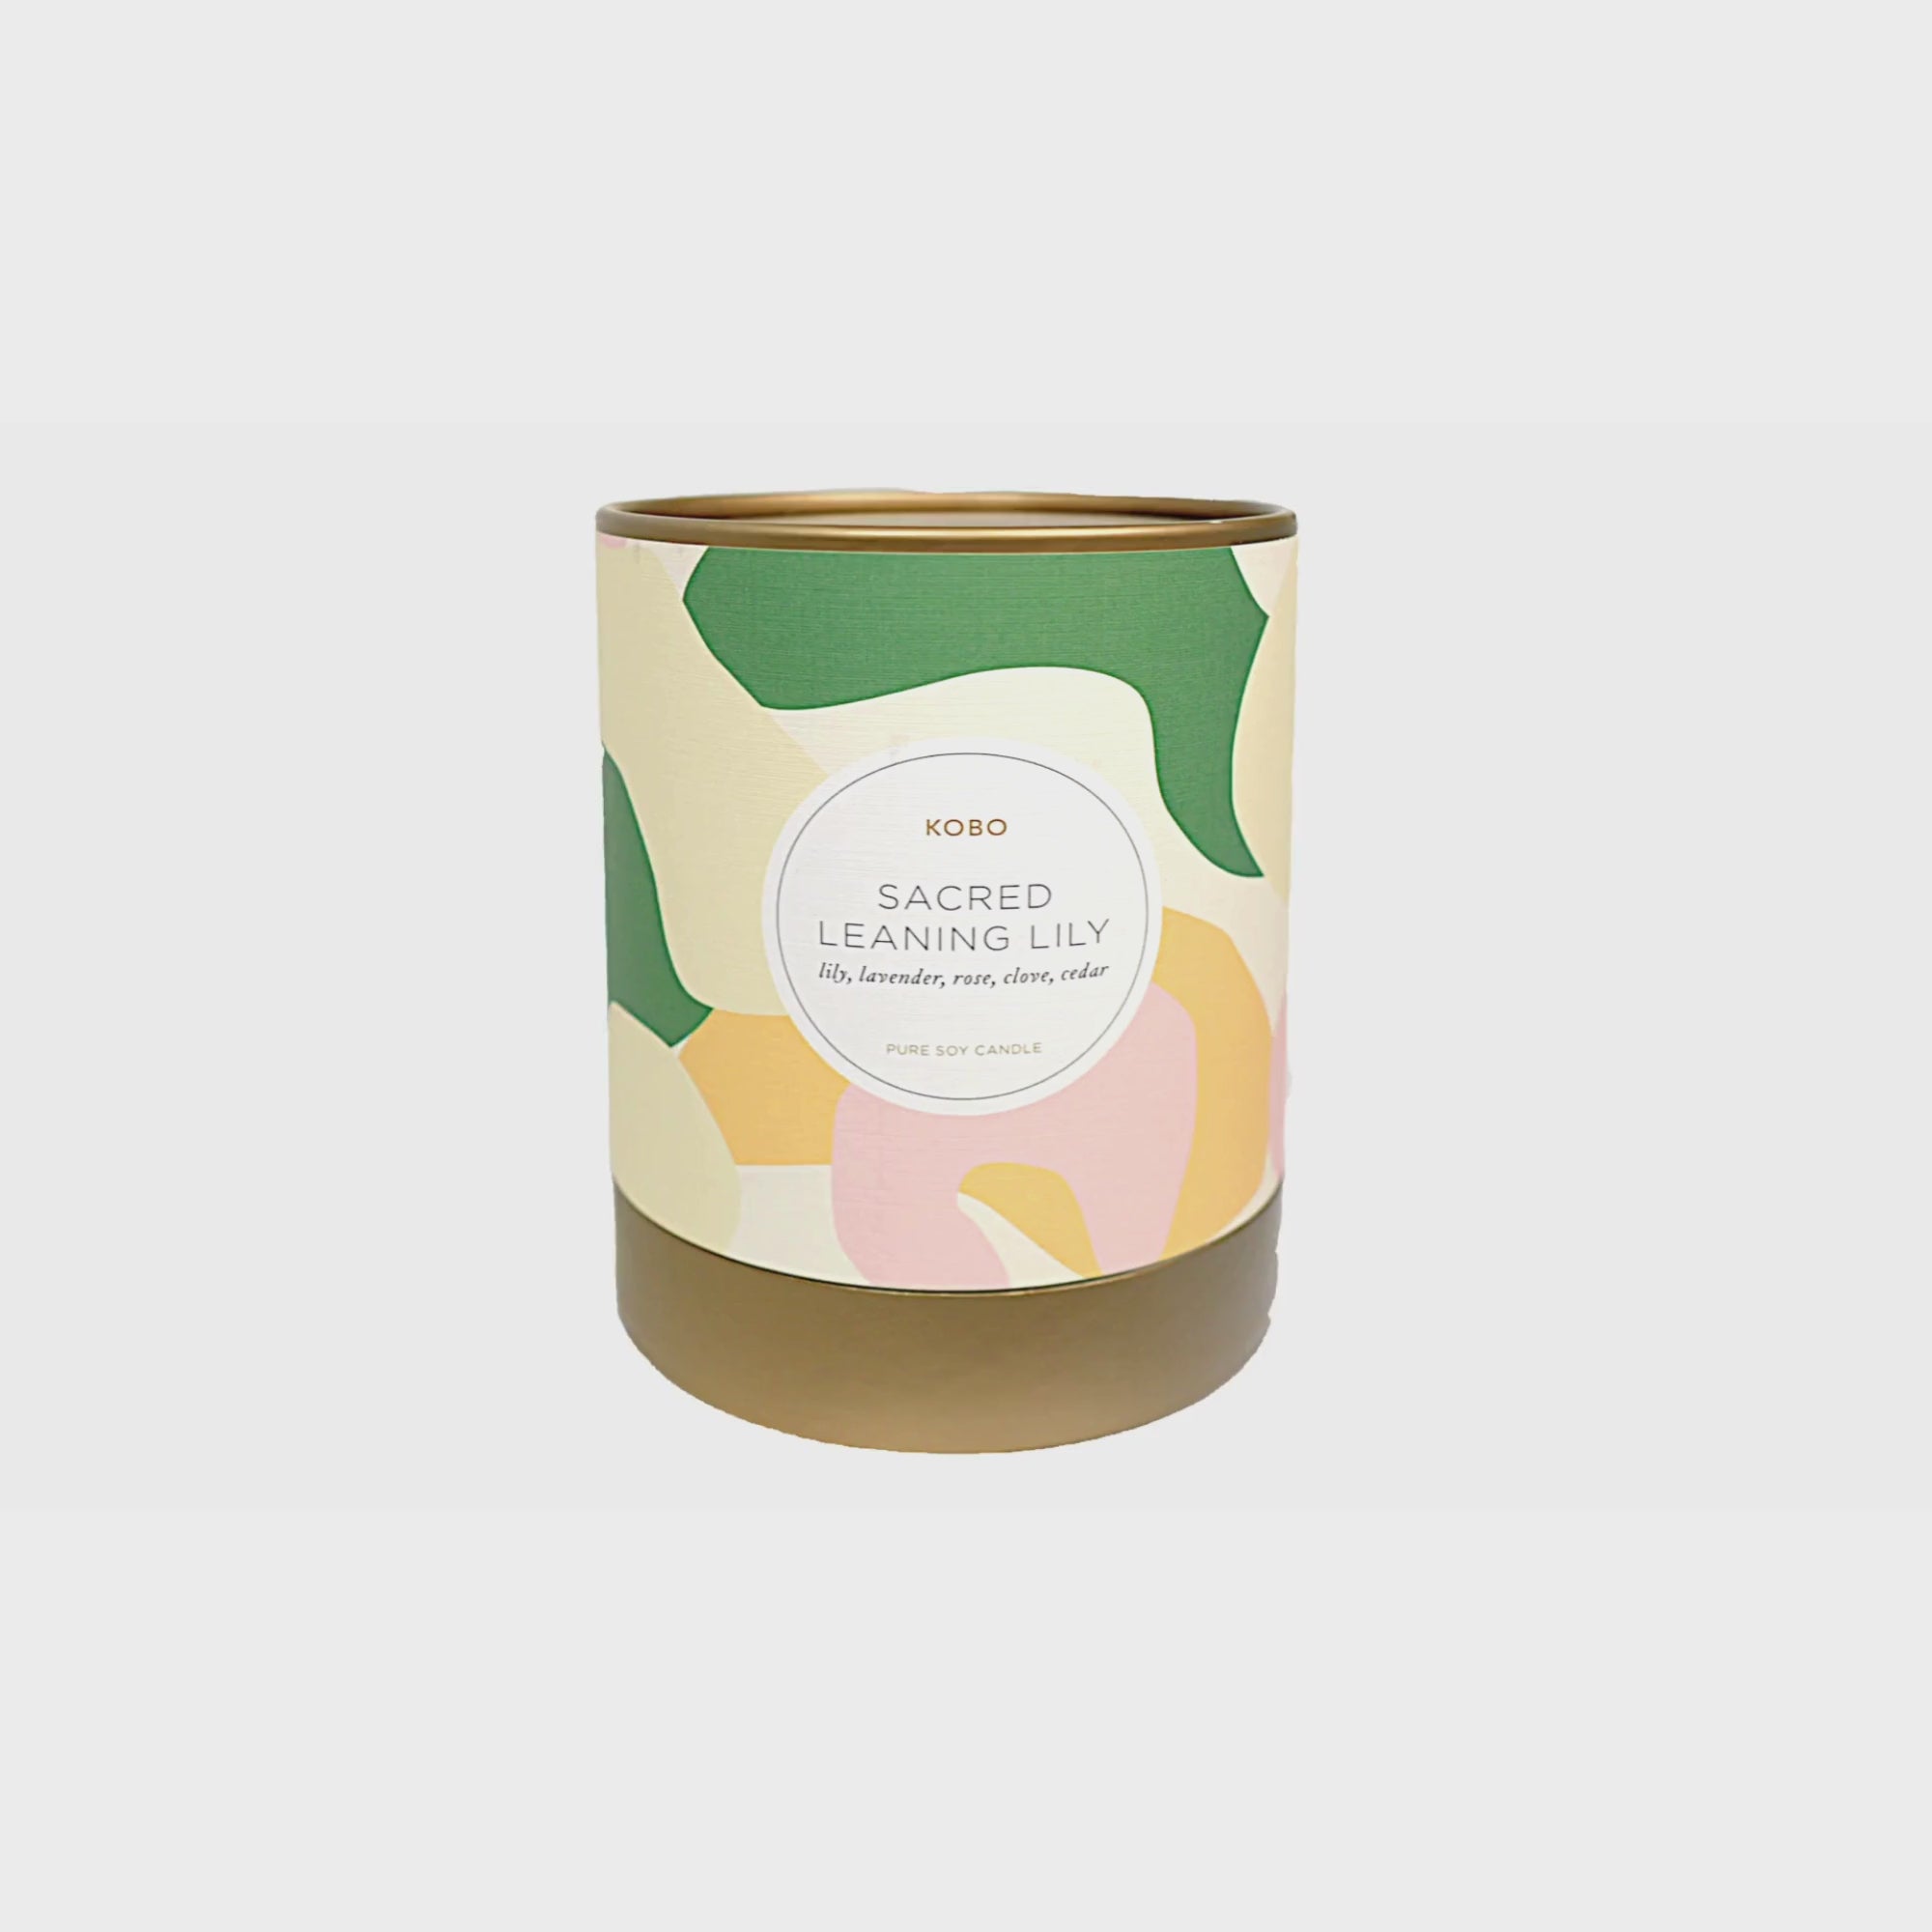 Alternate Image of Sacred Leaning Lily Camo 11 oz Pure Soy Candle